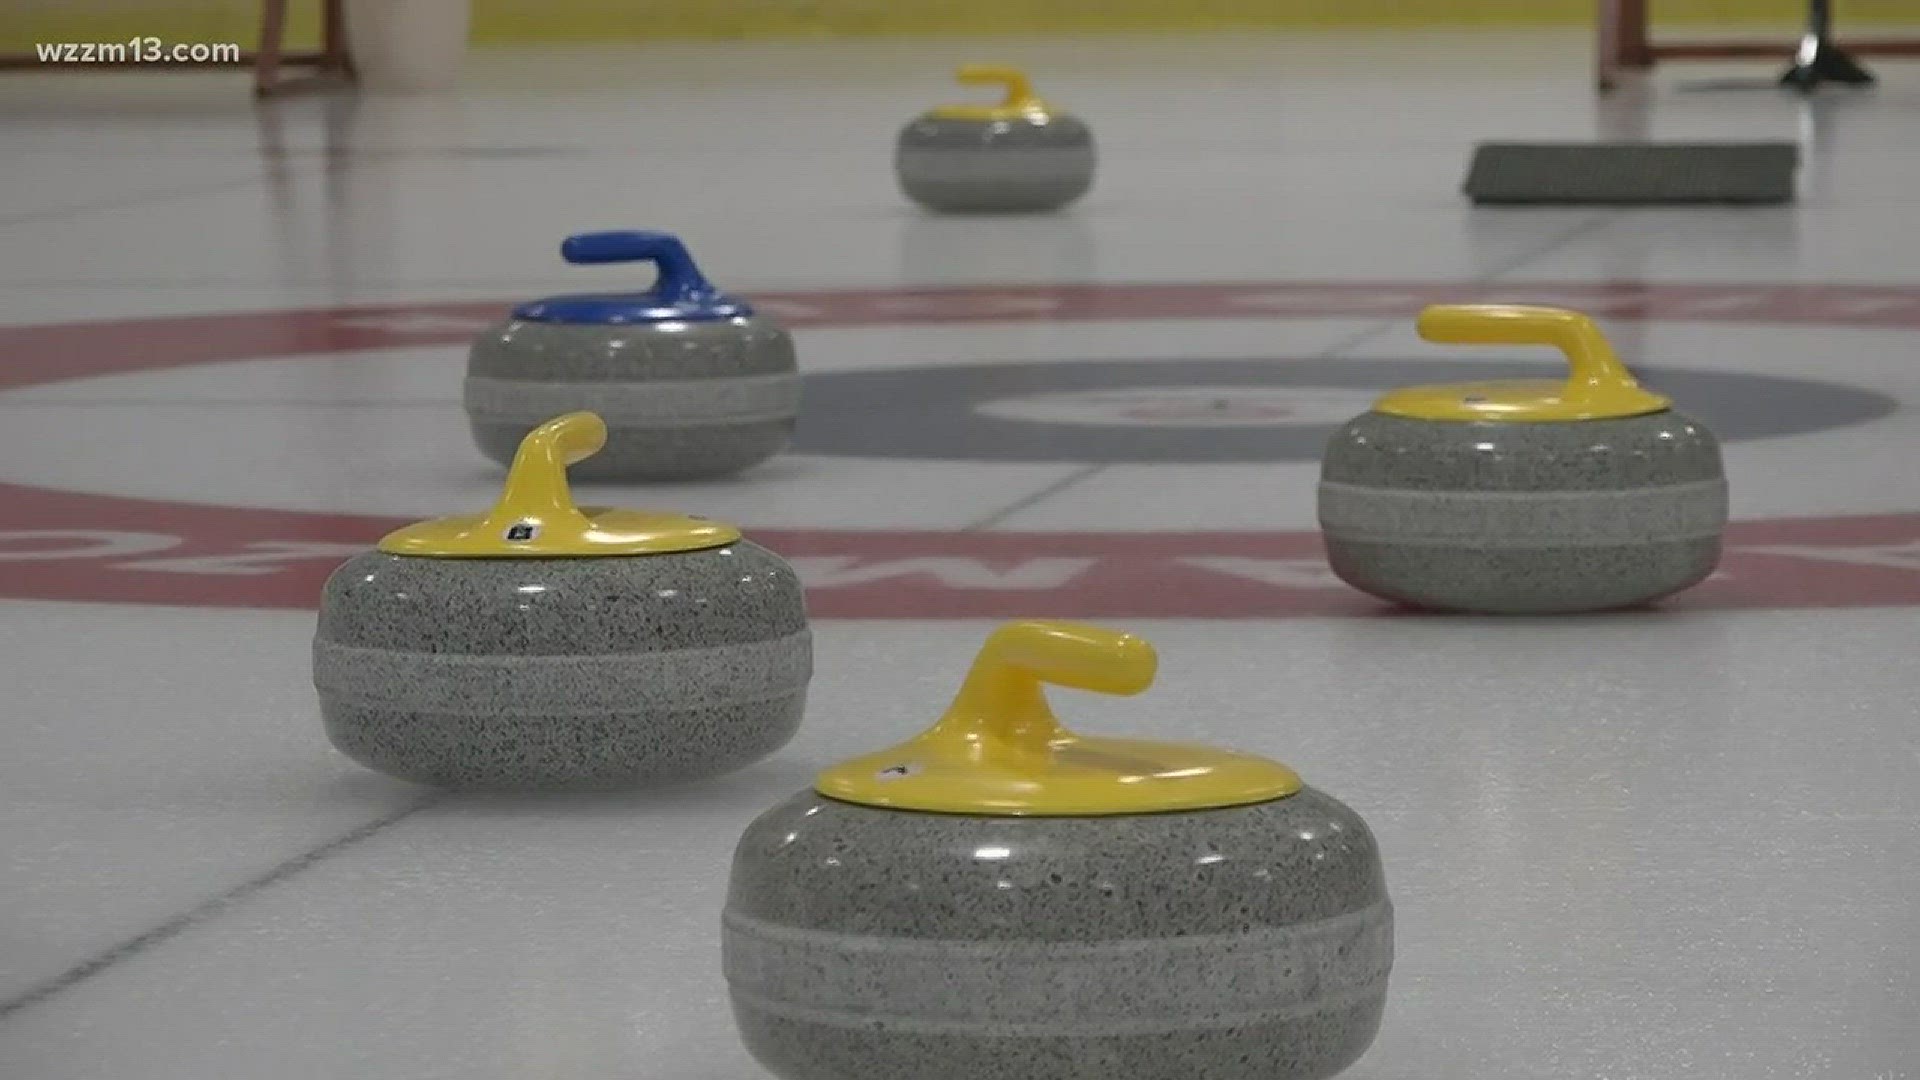 Learning curling at Wings Event Center in Kalamazoo, part 1